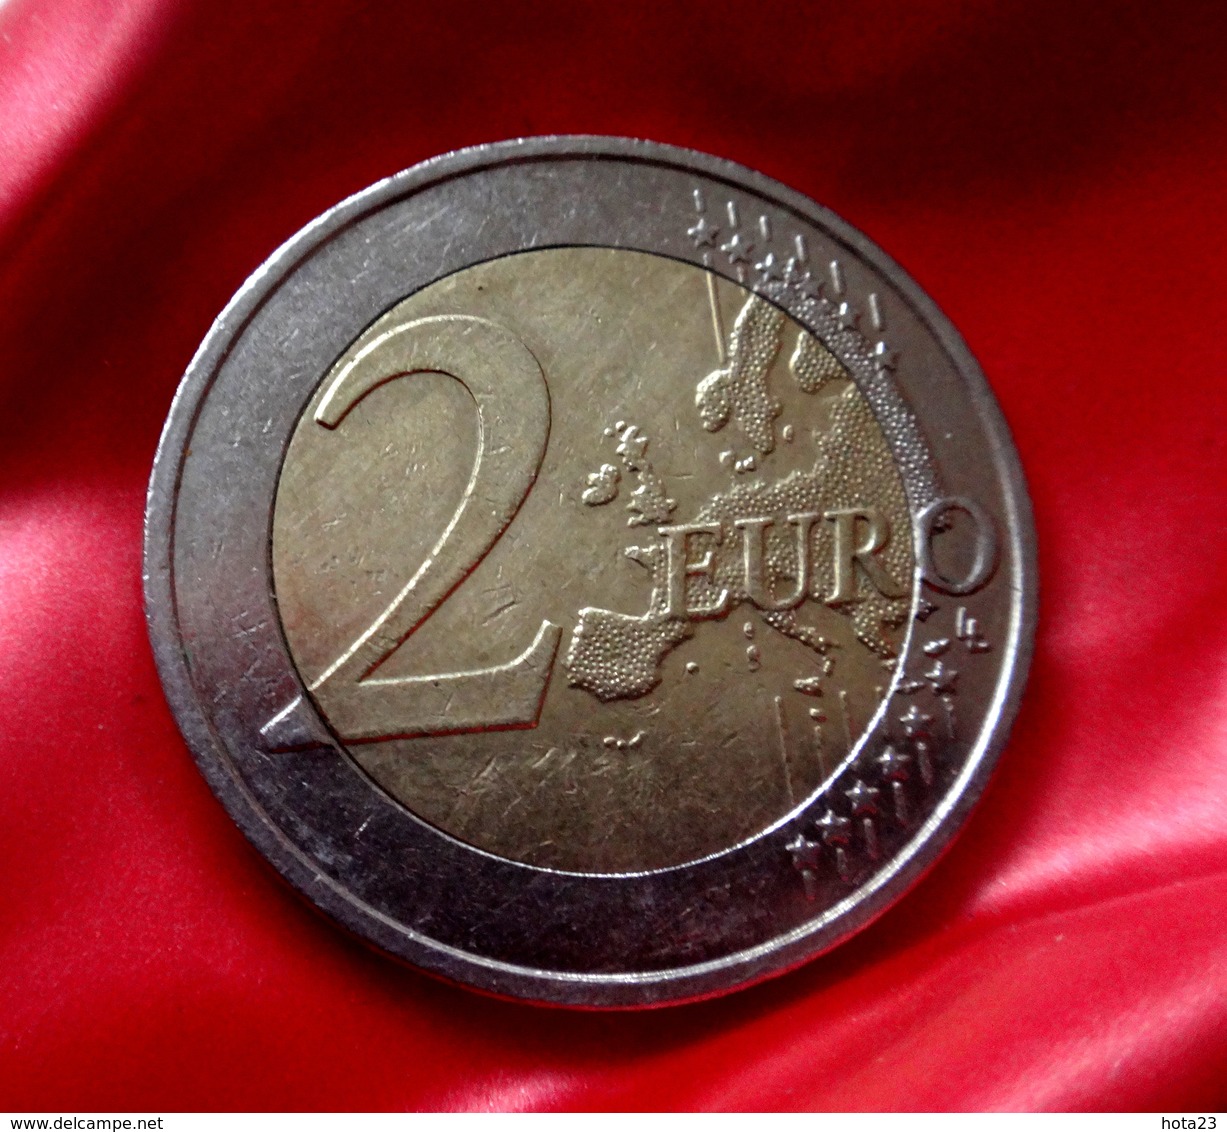 Germany 2 Euro 2016 Saxony Dresden - F -  CIRCULATED COIN - Allemagne